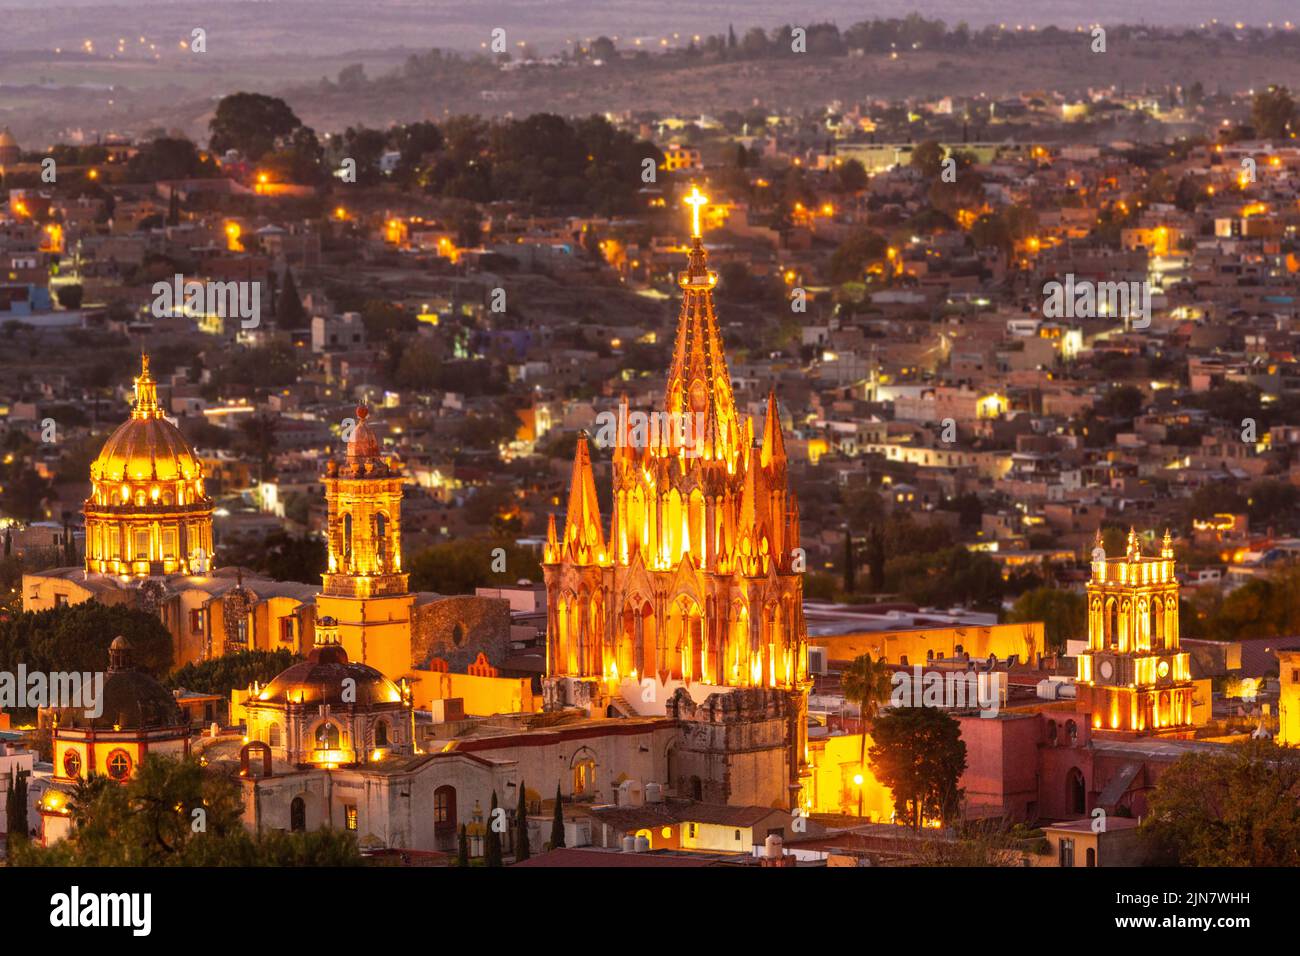 Colorful sunset over the Parroquia de San Miguel Arcangel and San Francisco church steeples in the historic district viewed from the hillside neighborhood of Los Balcones in San Miguel de Allende, Mexico. Stock Photo